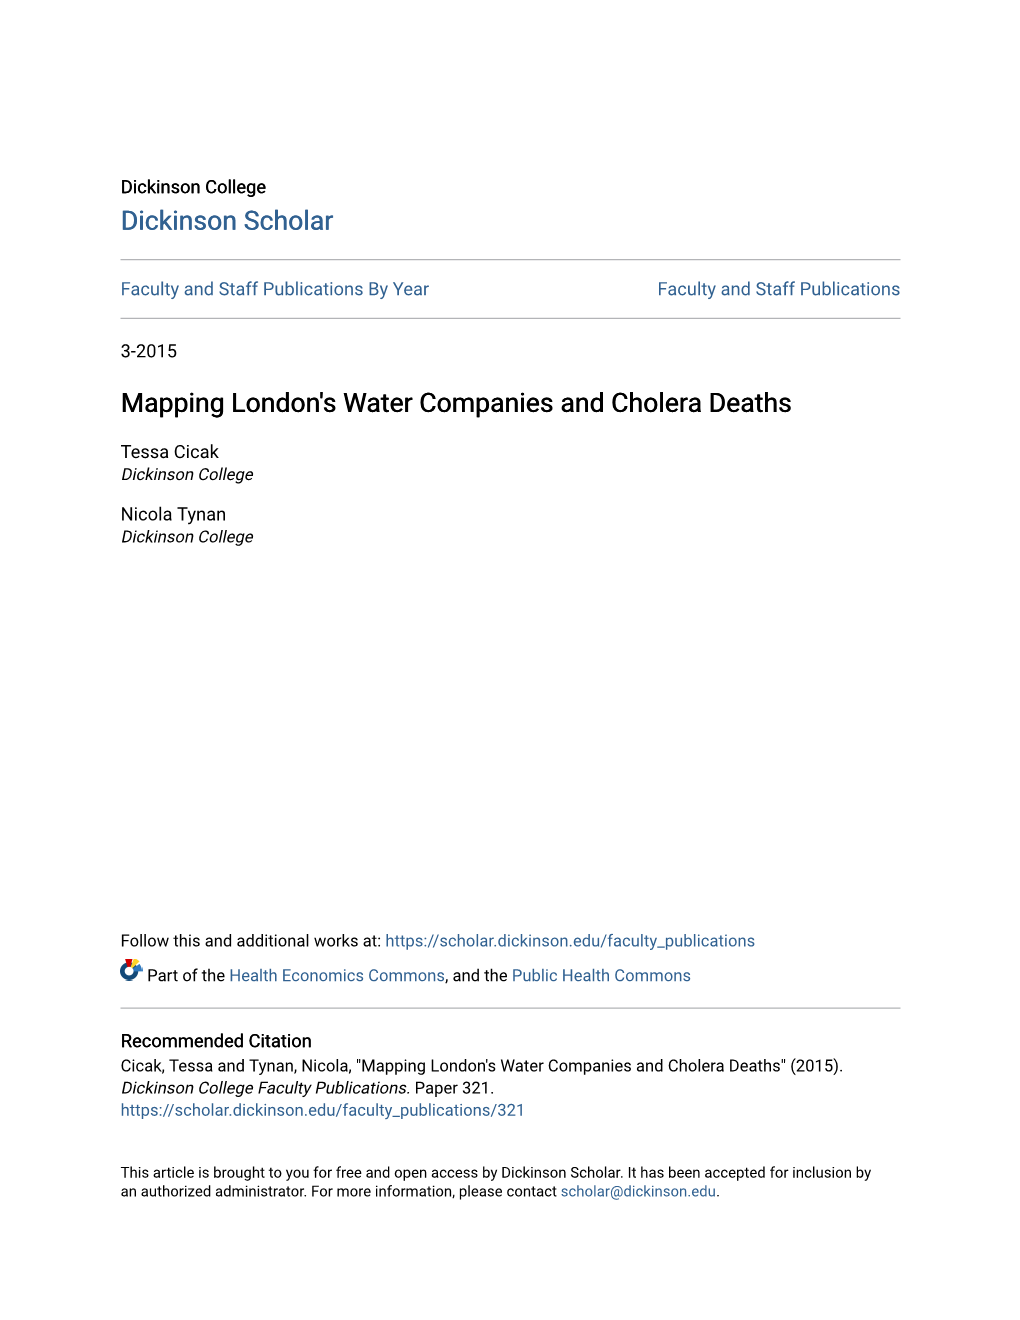 Mapping London's Water Companies and Cholera Deaths